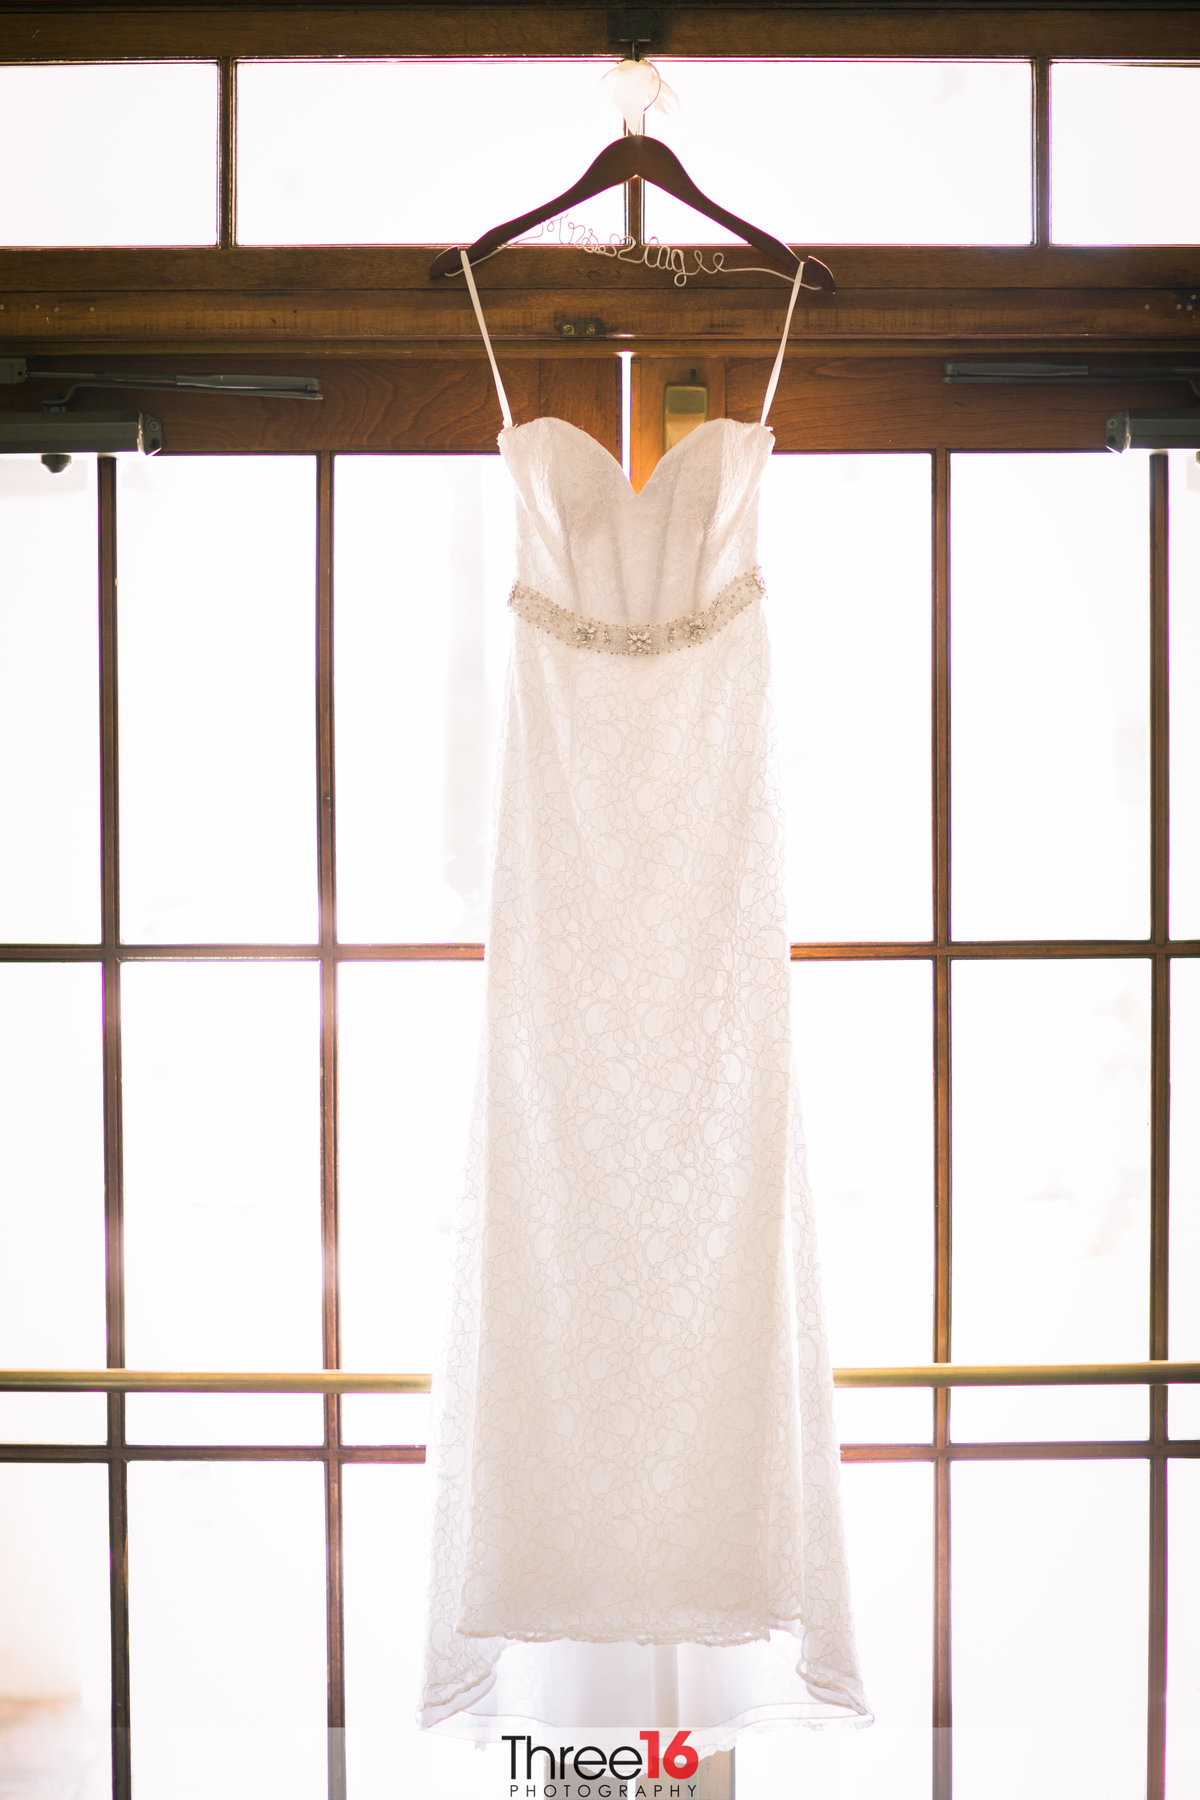 Brides dress hanging from a window